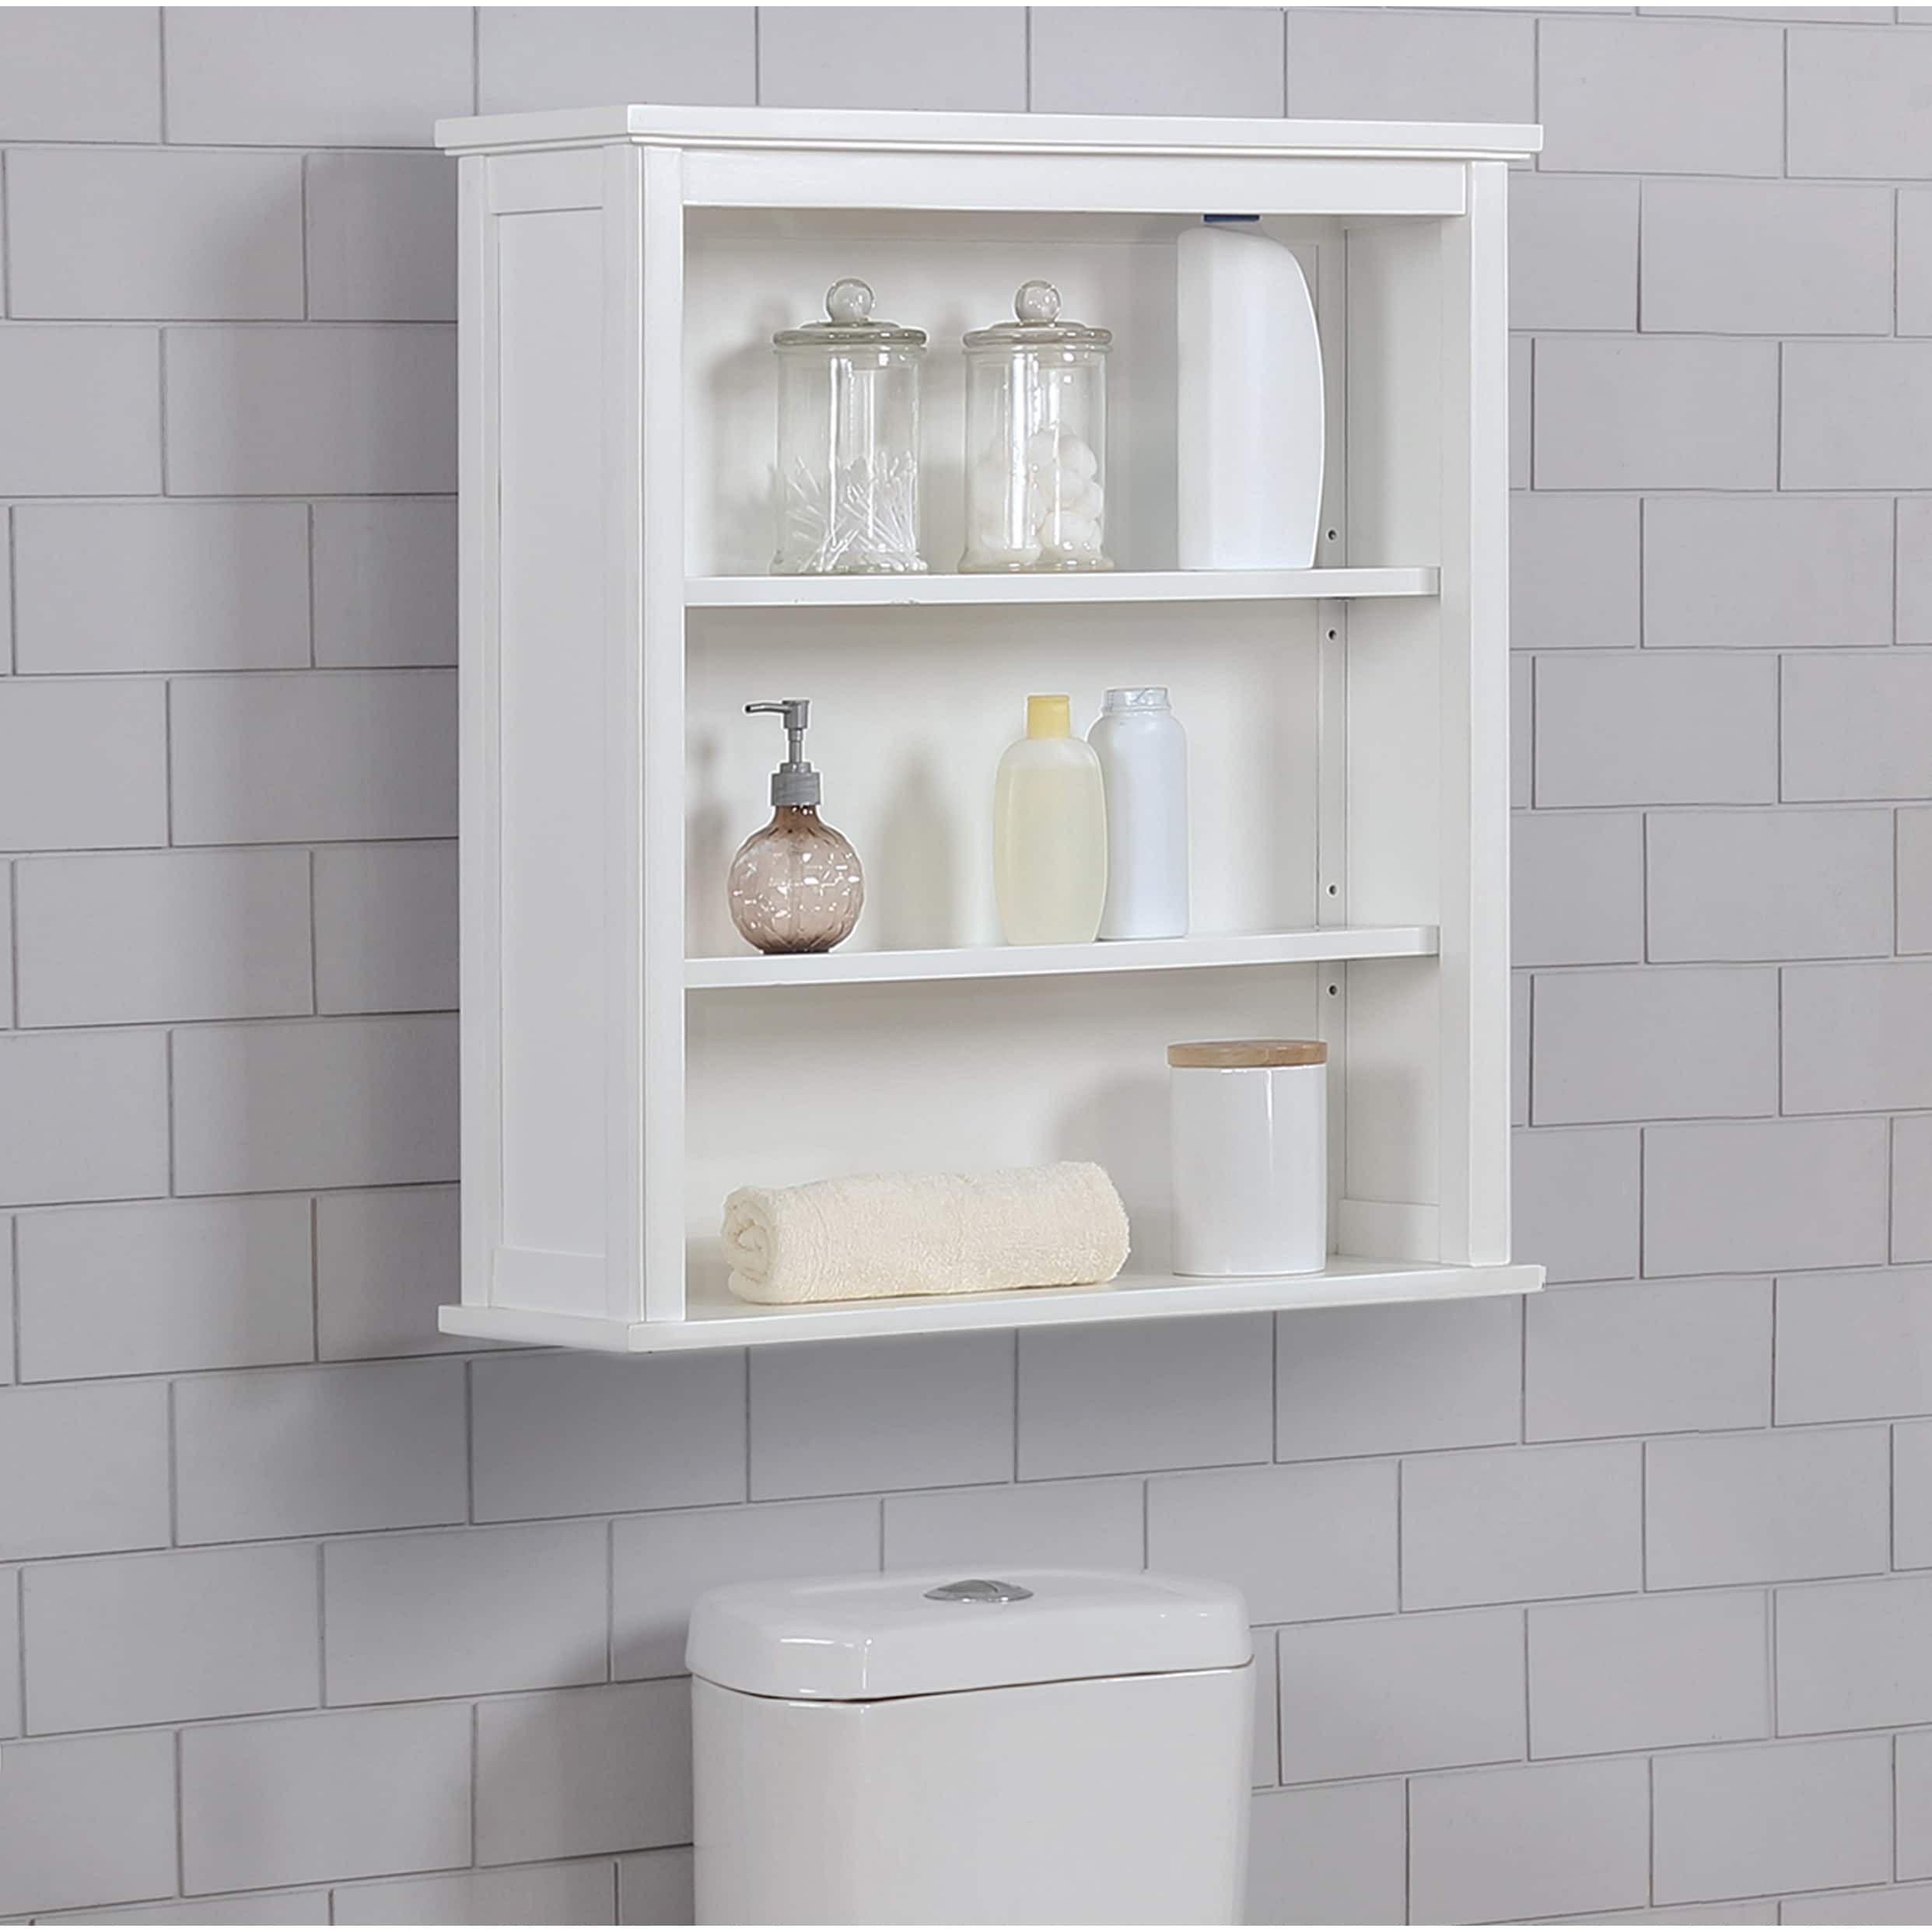 27 Bathroom Shelving Ideas for Storage and Display